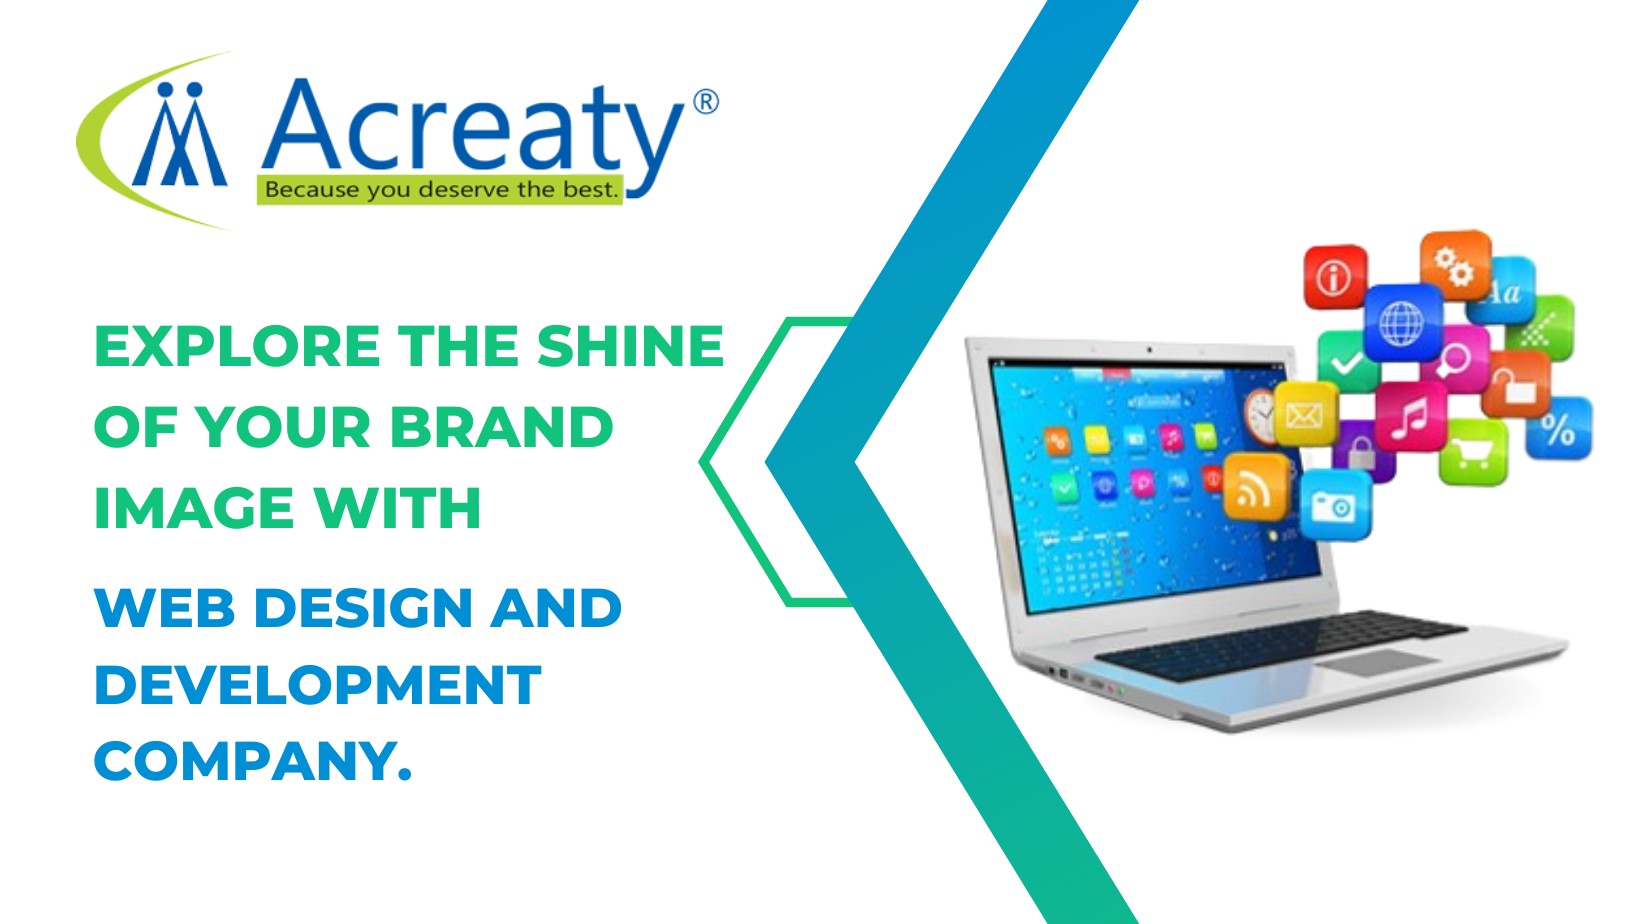 Explore the Shine of your Brand Image with Web Design and Development Company.